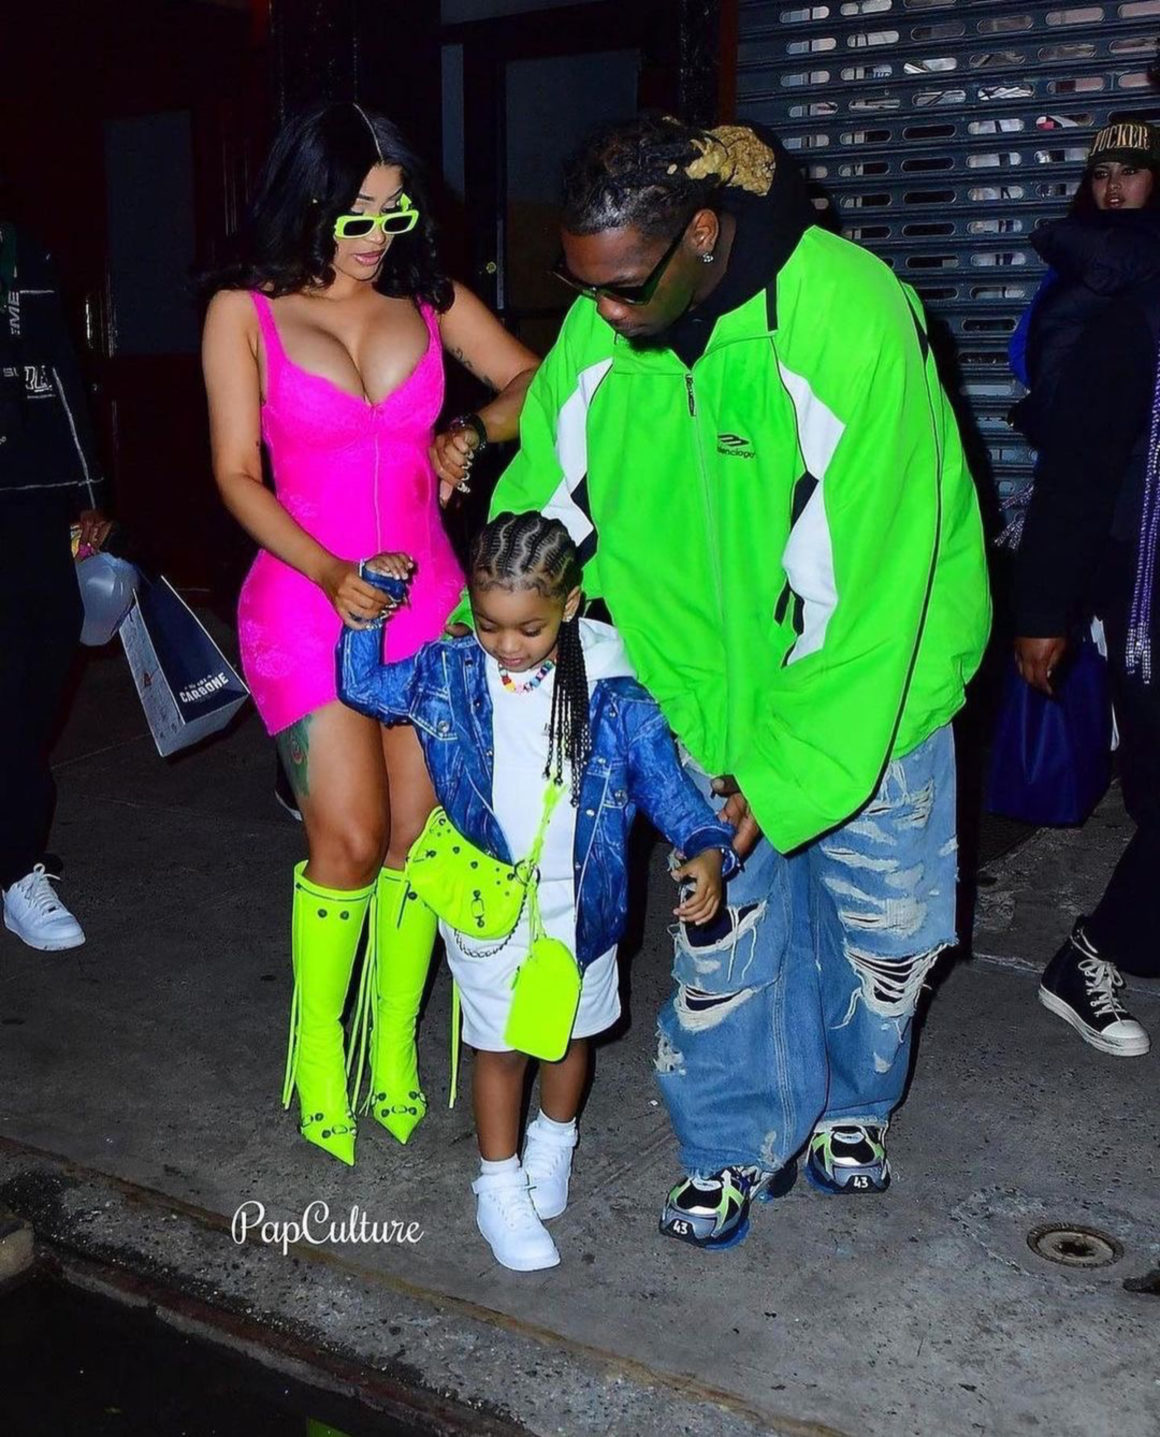 Cardi B, Offset, and Step Out in Neon Pink and Green Balenciaga Looks